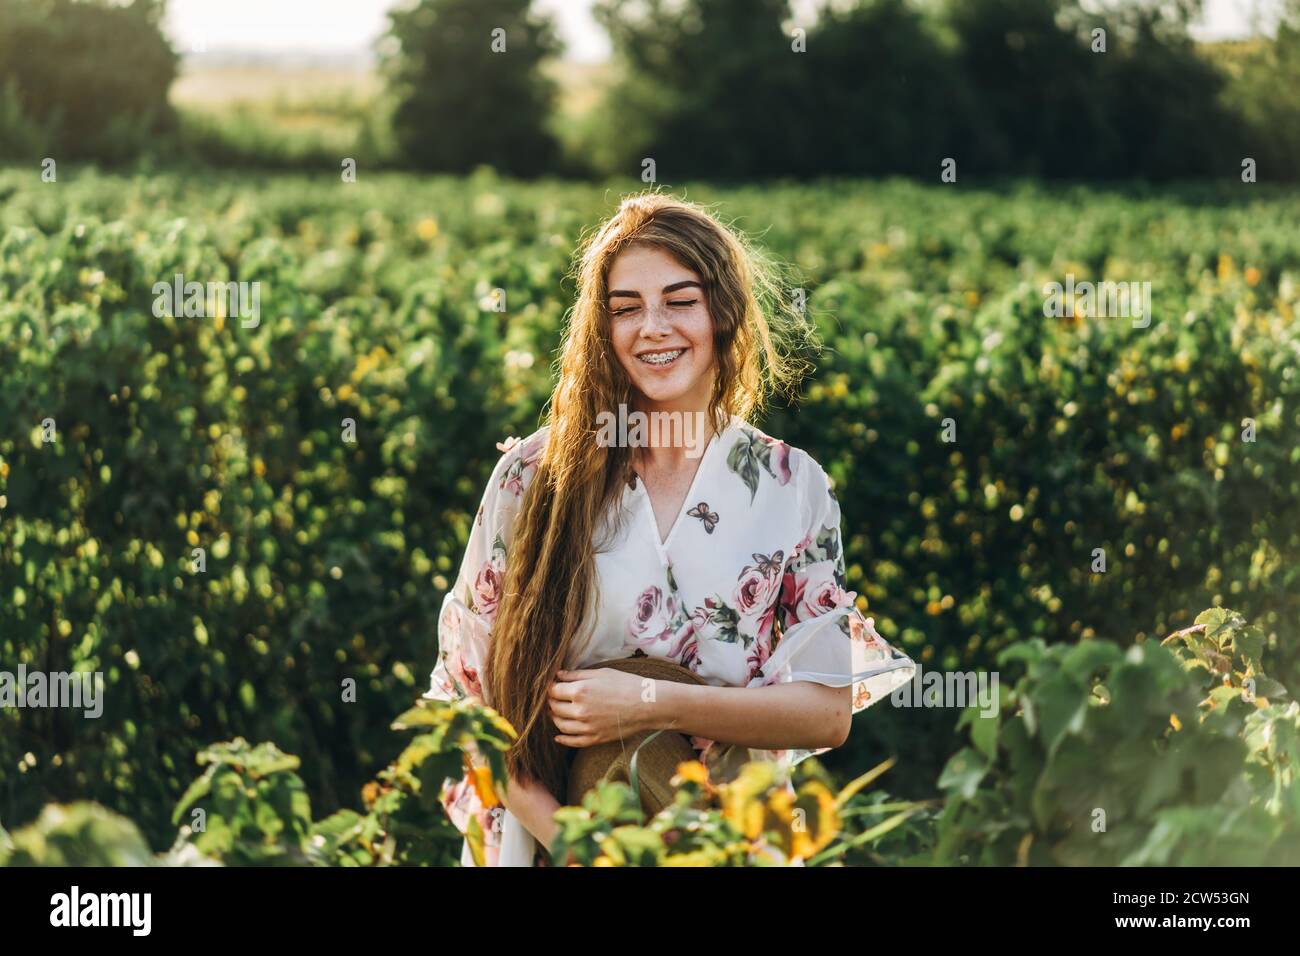 beautiful woman with long curly hair and freckles face on currant field background. Girl in a light dress walks in the summer sunny day. Stock Photo